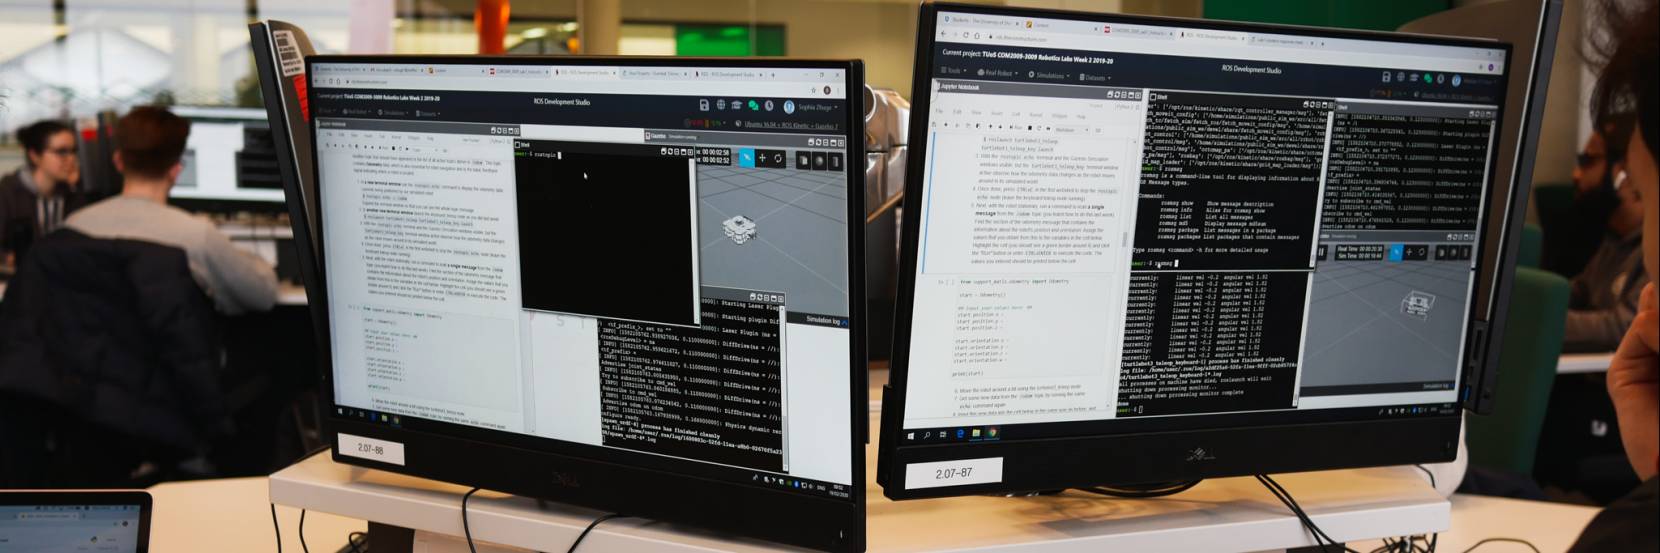 Two computer screens showing code and a virtual environment for programming robots